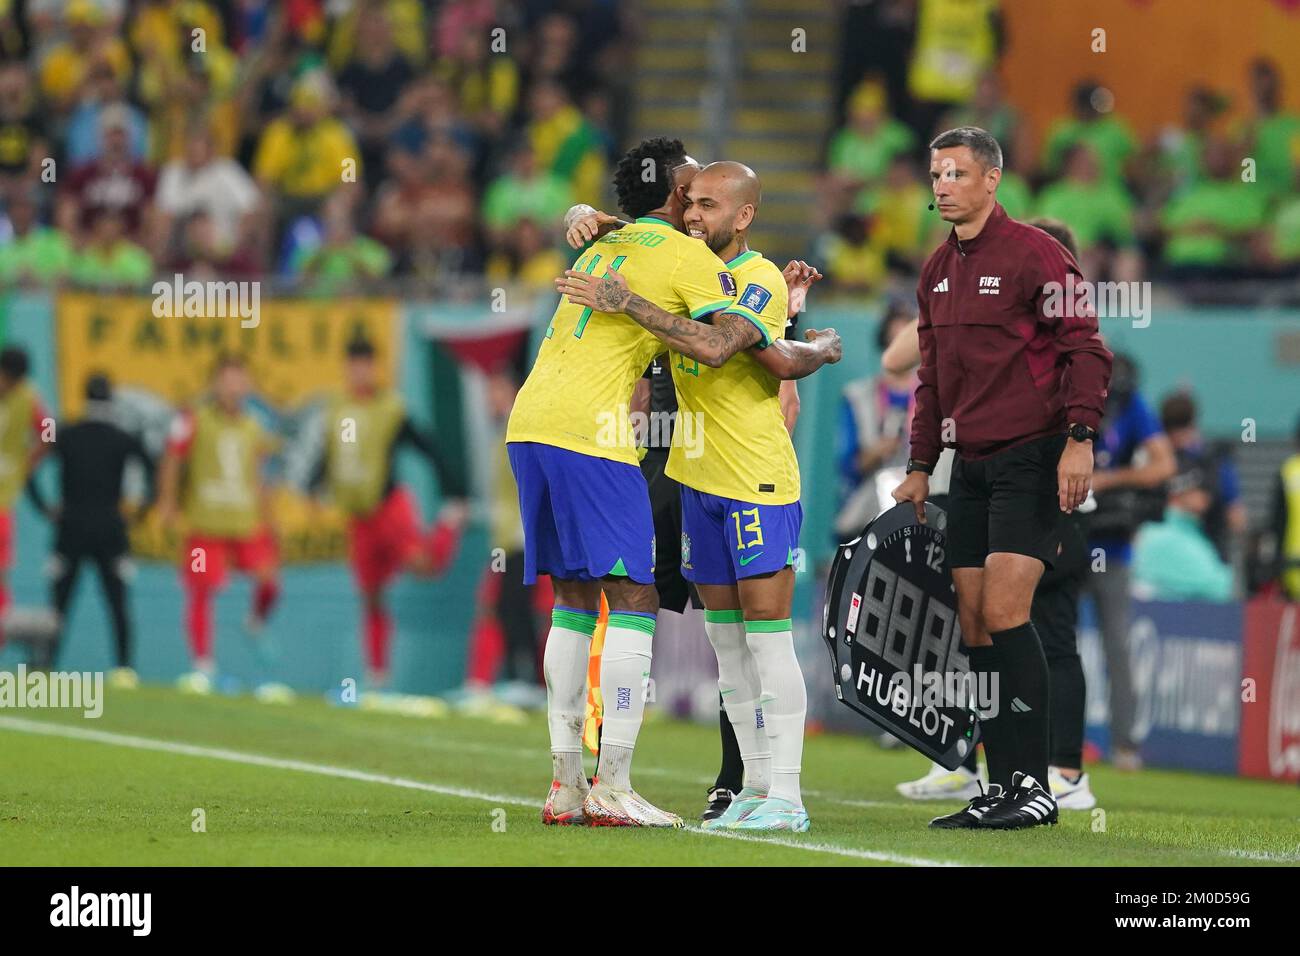 Doha, Qatar. 05th Dec, 2022. Stadium 974 DOHA, QATAR - DECEMBER 5: Player of Brazil Éder Militão is replaced by Dani Alves during the FIFA World Cup Qatar 2022 Round of 16 match between Brazil and South Korea at Stadium 974 on December 5, 2022 in Doha, Qatar. (Photo by Florencia Tan Jun/PxImages) (Florencia Tan Jun/SPP) Credit: SPP Sport Press Photo. /Alamy Live News Stock Photo